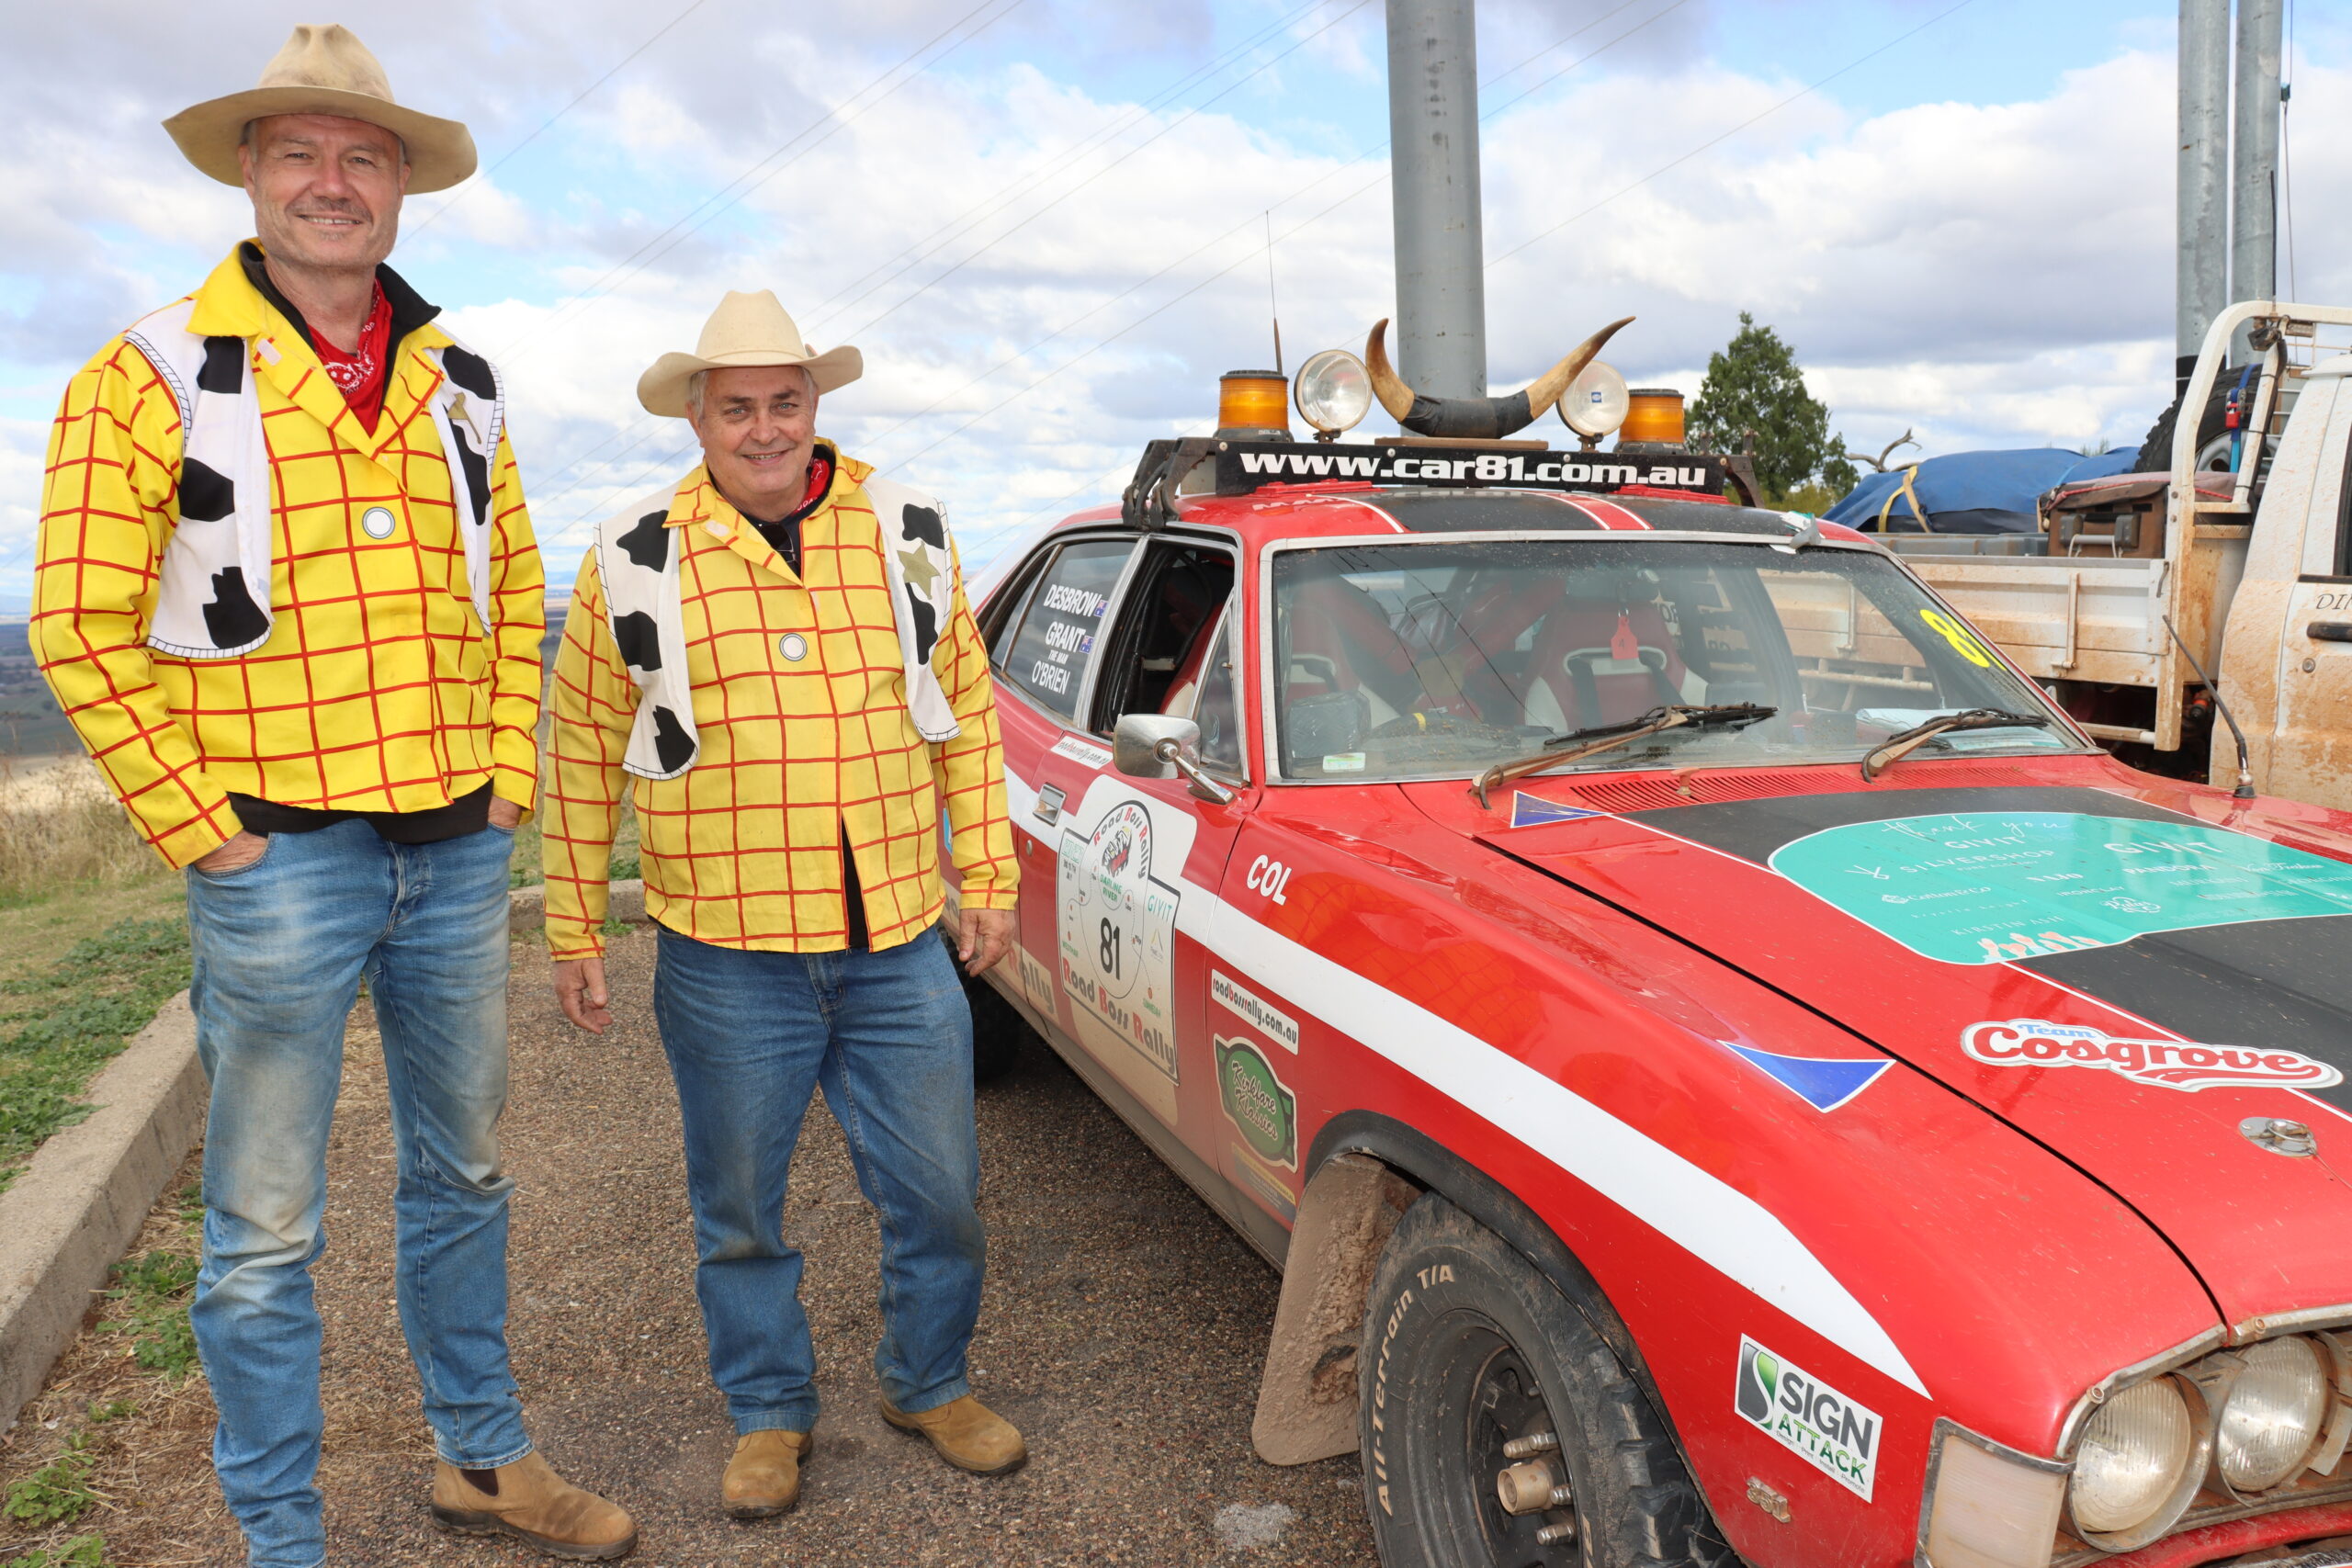 Boss Rally rolls into Gunnedah with $200,000 for charity